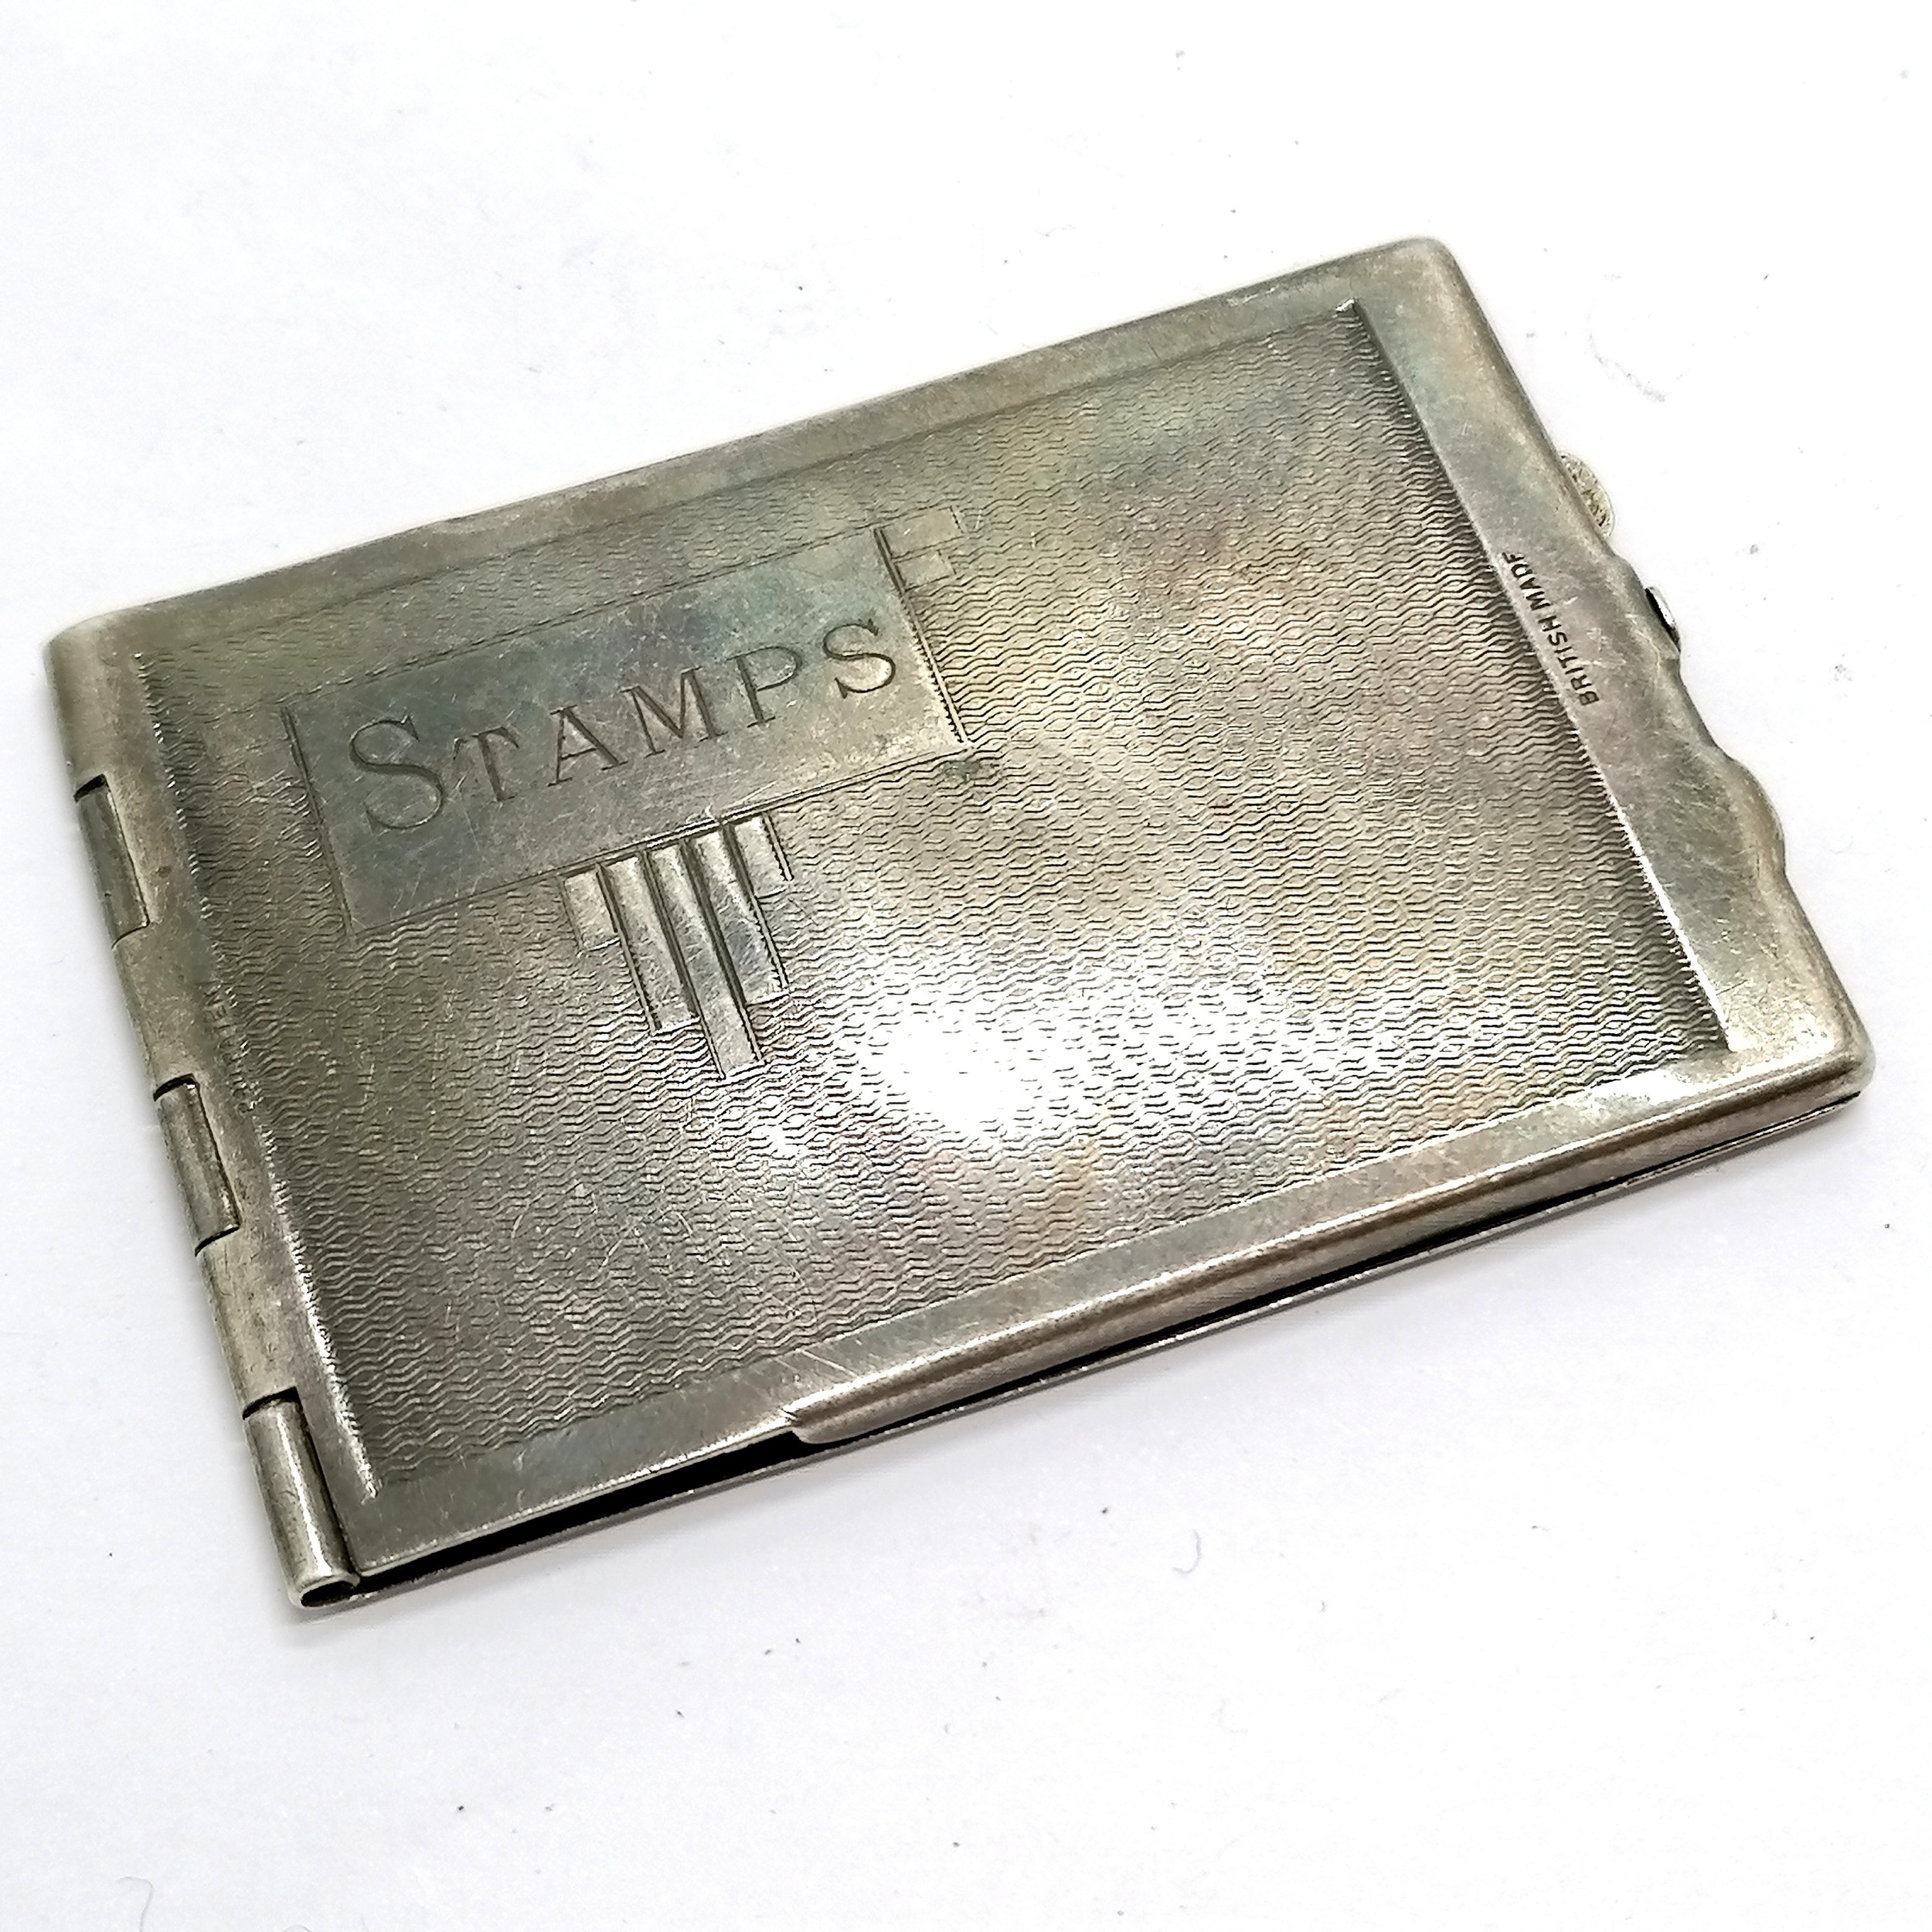 1934 silver stamps book case by SJ - 7cm x 4.8cm & 39g ~ has slight dents & wear